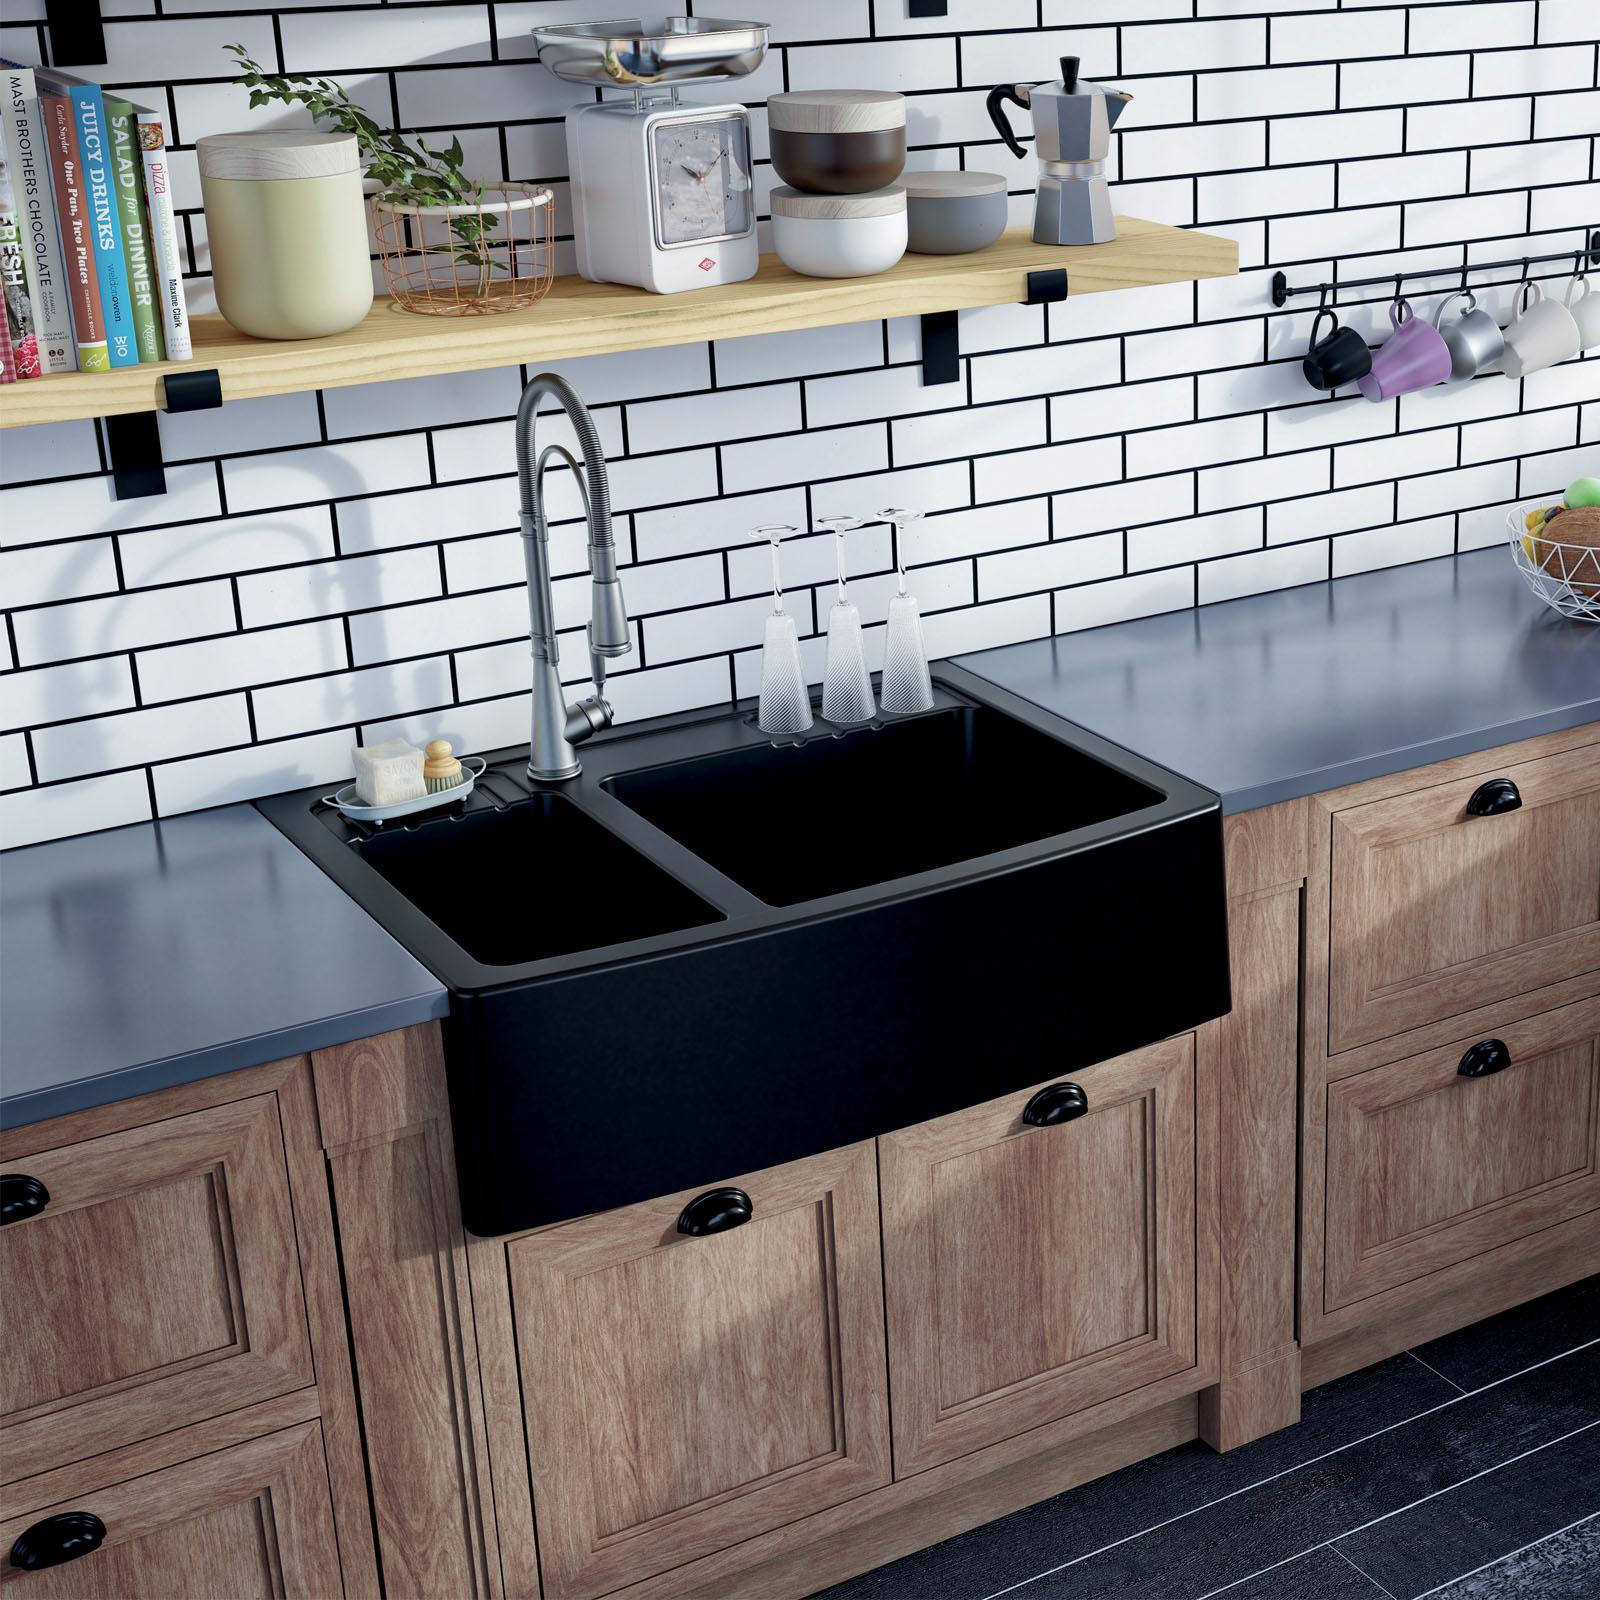 High-quality sink Clotaire III granit black - one and a half bowl - ambience